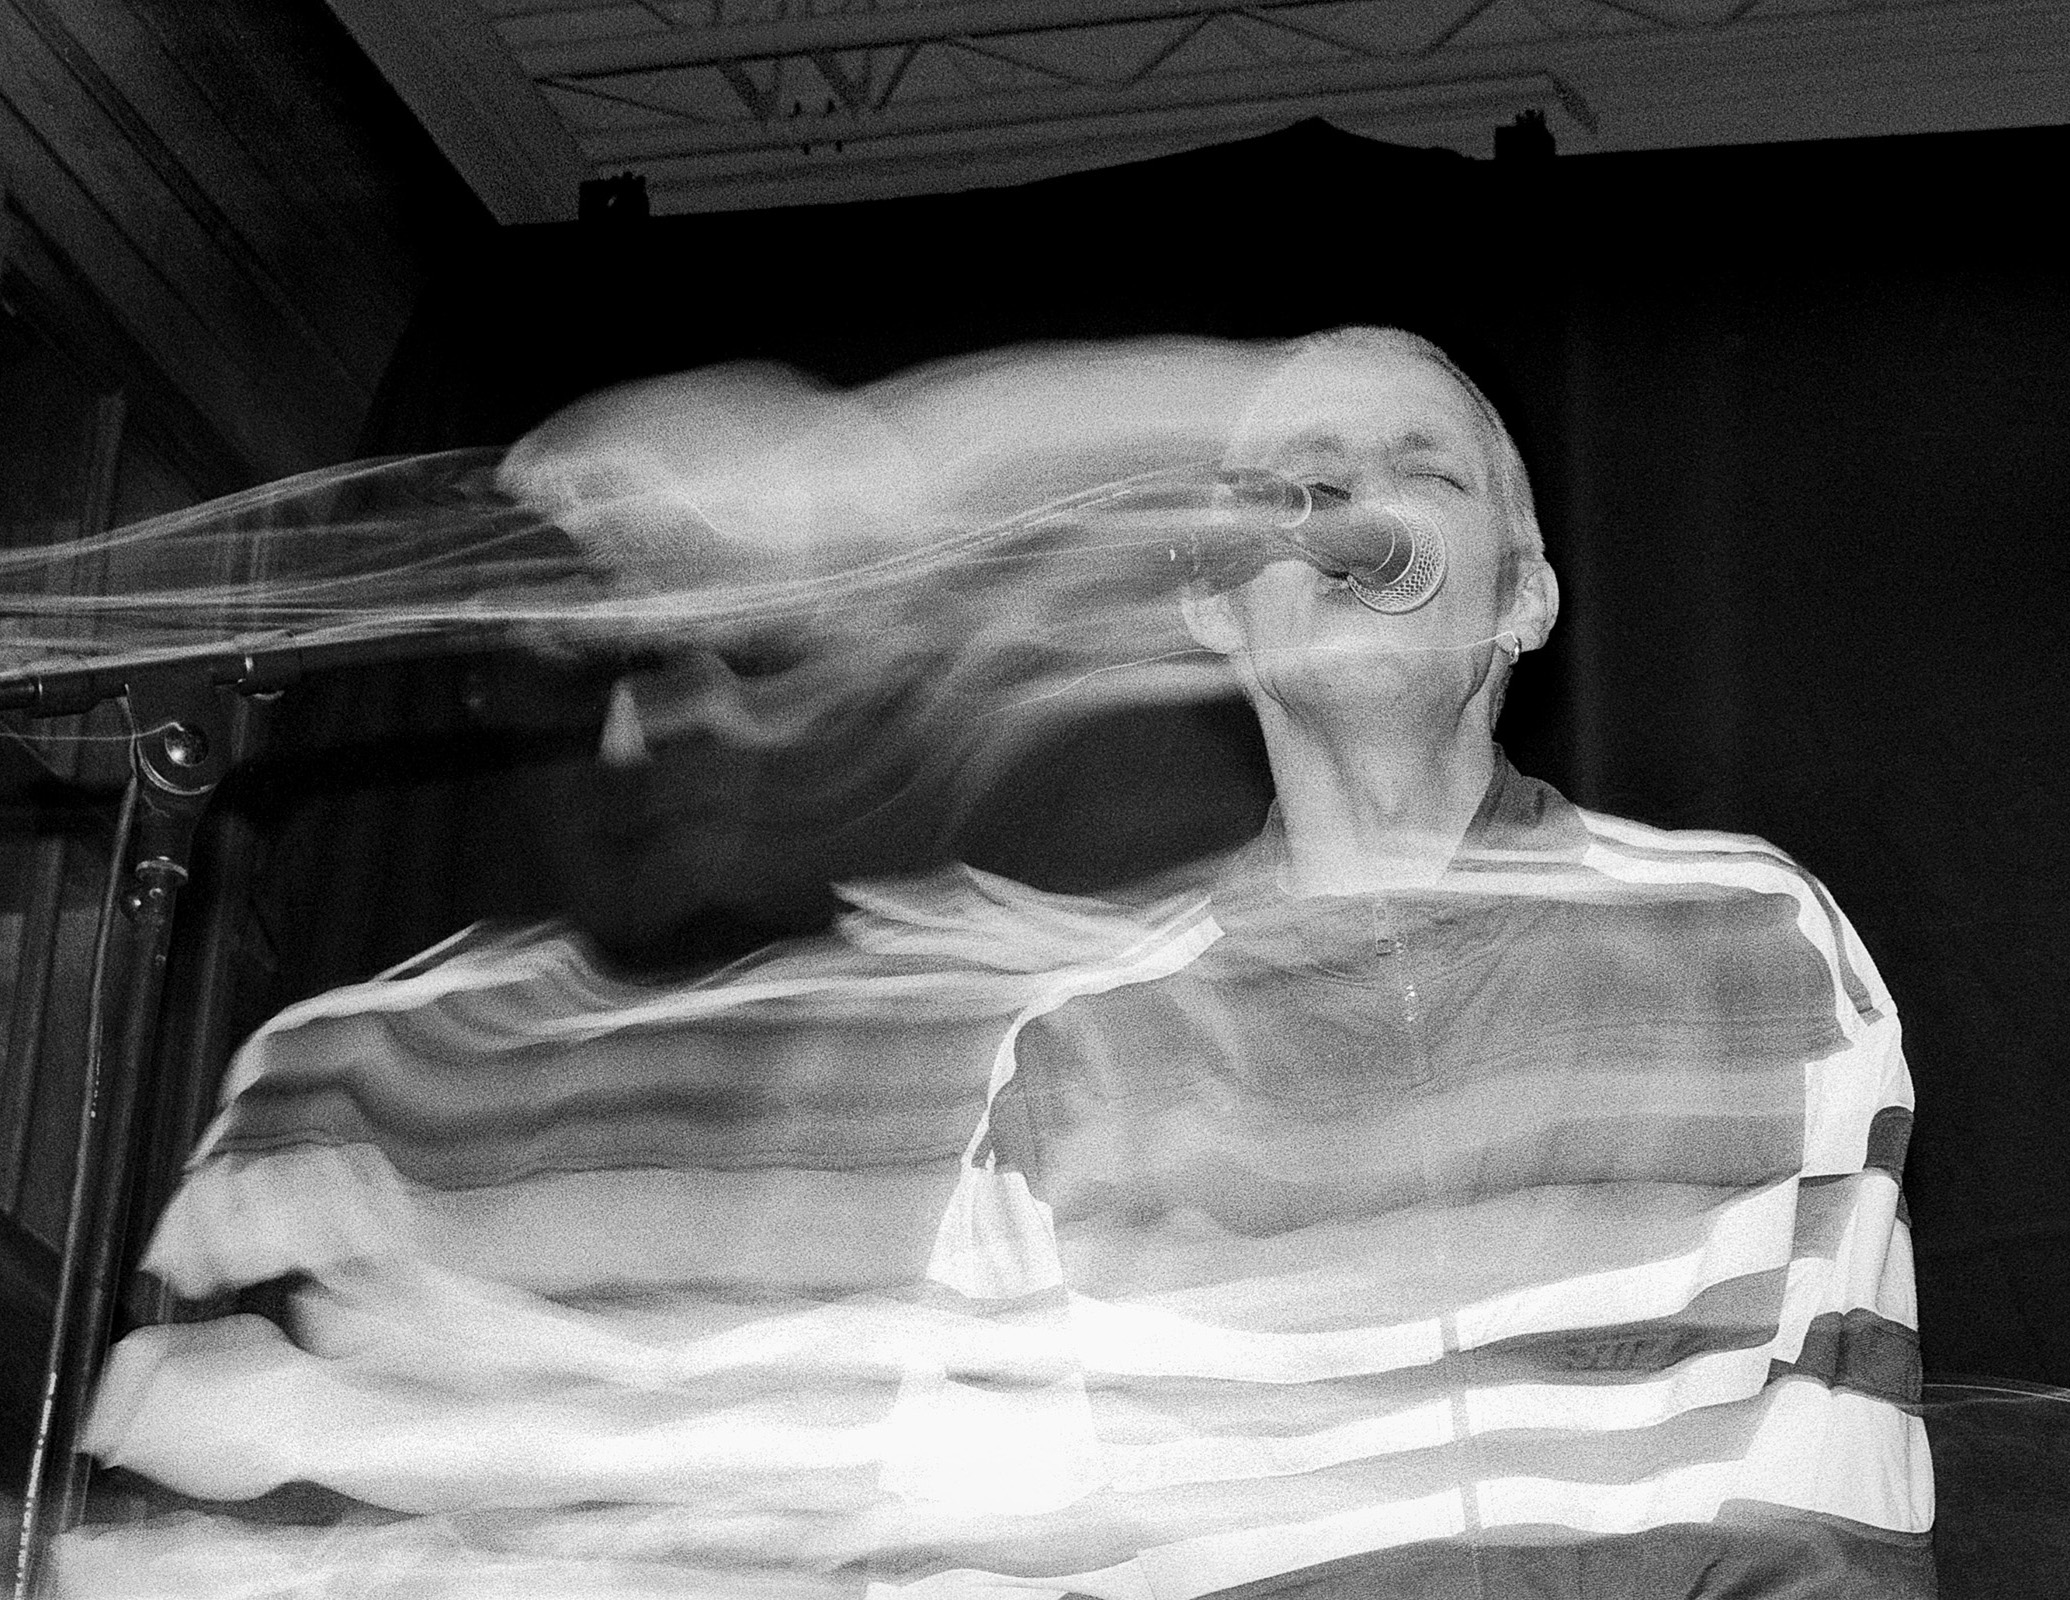 A portrait of Gustaf Rasch on stage with motion blur